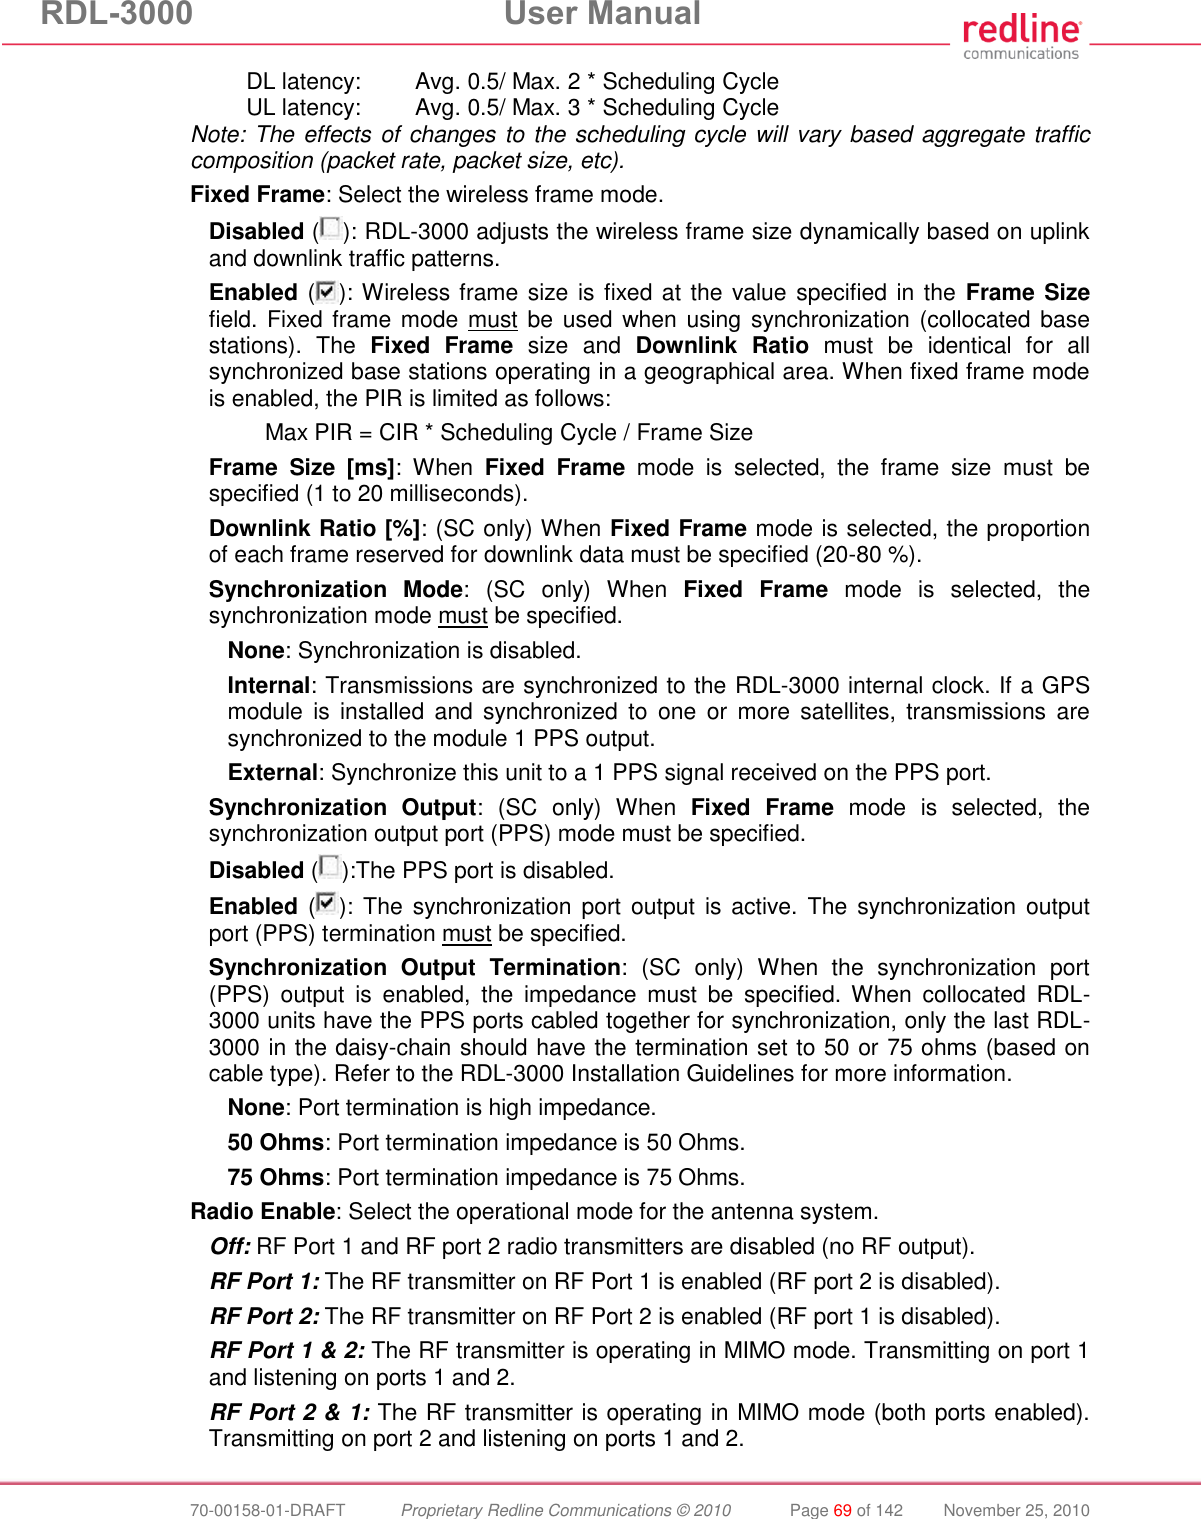 RDL-3000  User Manual  70-00158-01-DRAFT  Proprietary Redline Communications © 2010  Page 69 of 142  November 25, 2010 DL latency:  Avg. 0.5/ Max. 2 * Scheduling Cycle UL latency:  Avg. 0.5/ Max. 3 * Scheduling Cycle Note: The effects of changes to the scheduling cycle will vary based aggregate traffic composition (packet rate, packet size, etc). Fixed Frame: Select the wireless frame mode. Disabled ( ): RDL-3000 adjusts the wireless frame size dynamically based on uplink and downlink traffic patterns. Enabled ( ): Wireless frame size is fixed at the value specified in the  Frame Size field. Fixed frame mode must be  used  when using synchronization (collocated base stations).  The  Fixed  Frame  size  and  Downlink  Ratio  must  be  identical  for  all synchronized base stations operating in a geographical area. When fixed frame mode is enabled, the PIR is limited as follows:   Max PIR = CIR * Scheduling Cycle / Frame Size  Frame  Size  [ms]:  When  Fixed  Frame  mode  is  selected,  the  frame  size  must  be specified (1 to 20 milliseconds). Downlink Ratio [%]: (SC only) When Fixed Frame mode is selected, the proportion of each frame reserved for downlink data must be specified (20-80 %). Synchronization  Mode:  (SC  only)  When  Fixed  Frame  mode  is  selected,  the synchronization mode must be specified. None: Synchronization is disabled. Internal: Transmissions are synchronized to the RDL-3000 internal clock. If a GPS module  is  installed  and  synchronized  to  one  or  more  satellites,  transmissions  are synchronized to the module 1 PPS output. External: Synchronize this unit to a 1 PPS signal received on the PPS port. Synchronization  Output:  (SC  only)  When  Fixed  Frame  mode  is  selected,  the synchronization output port (PPS) mode must be specified. Disabled ( ):The PPS port is disabled. Enabled ( ): The  synchronization port  output  is active. The  synchronization  output port (PPS) termination must be specified. Synchronization  Output  Termination:  (SC  only)  When  the  synchronization  port (PPS)  output  is  enabled,  the  impedance  must  be  specified.  When  collocated  RDL-3000 units have the PPS ports cabled together for synchronization, only the last RDL-3000 in the daisy-chain should have the termination set to 50 or 75 ohms (based on cable type). Refer to the RDL-3000 Installation Guidelines for more information. None: Port termination is high impedance.  50 Ohms: Port termination impedance is 50 Ohms. 75 Ohms: Port termination impedance is 75 Ohms. Radio Enable: Select the operational mode for the antenna system. Off: RF Port 1 and RF port 2 radio transmitters are disabled (no RF output). RF Port 1: The RF transmitter on RF Port 1 is enabled (RF port 2 is disabled). RF Port 2: The RF transmitter on RF Port 2 is enabled (RF port 1 is disabled). RF Port 1 &amp; 2: The RF transmitter is operating in MIMO mode. Transmitting on port 1 and listening on ports 1 and 2. RF Port 2 &amp; 1: The RF transmitter is operating in MIMO mode (both ports enabled). Transmitting on port 2 and listening on ports 1 and 2. 